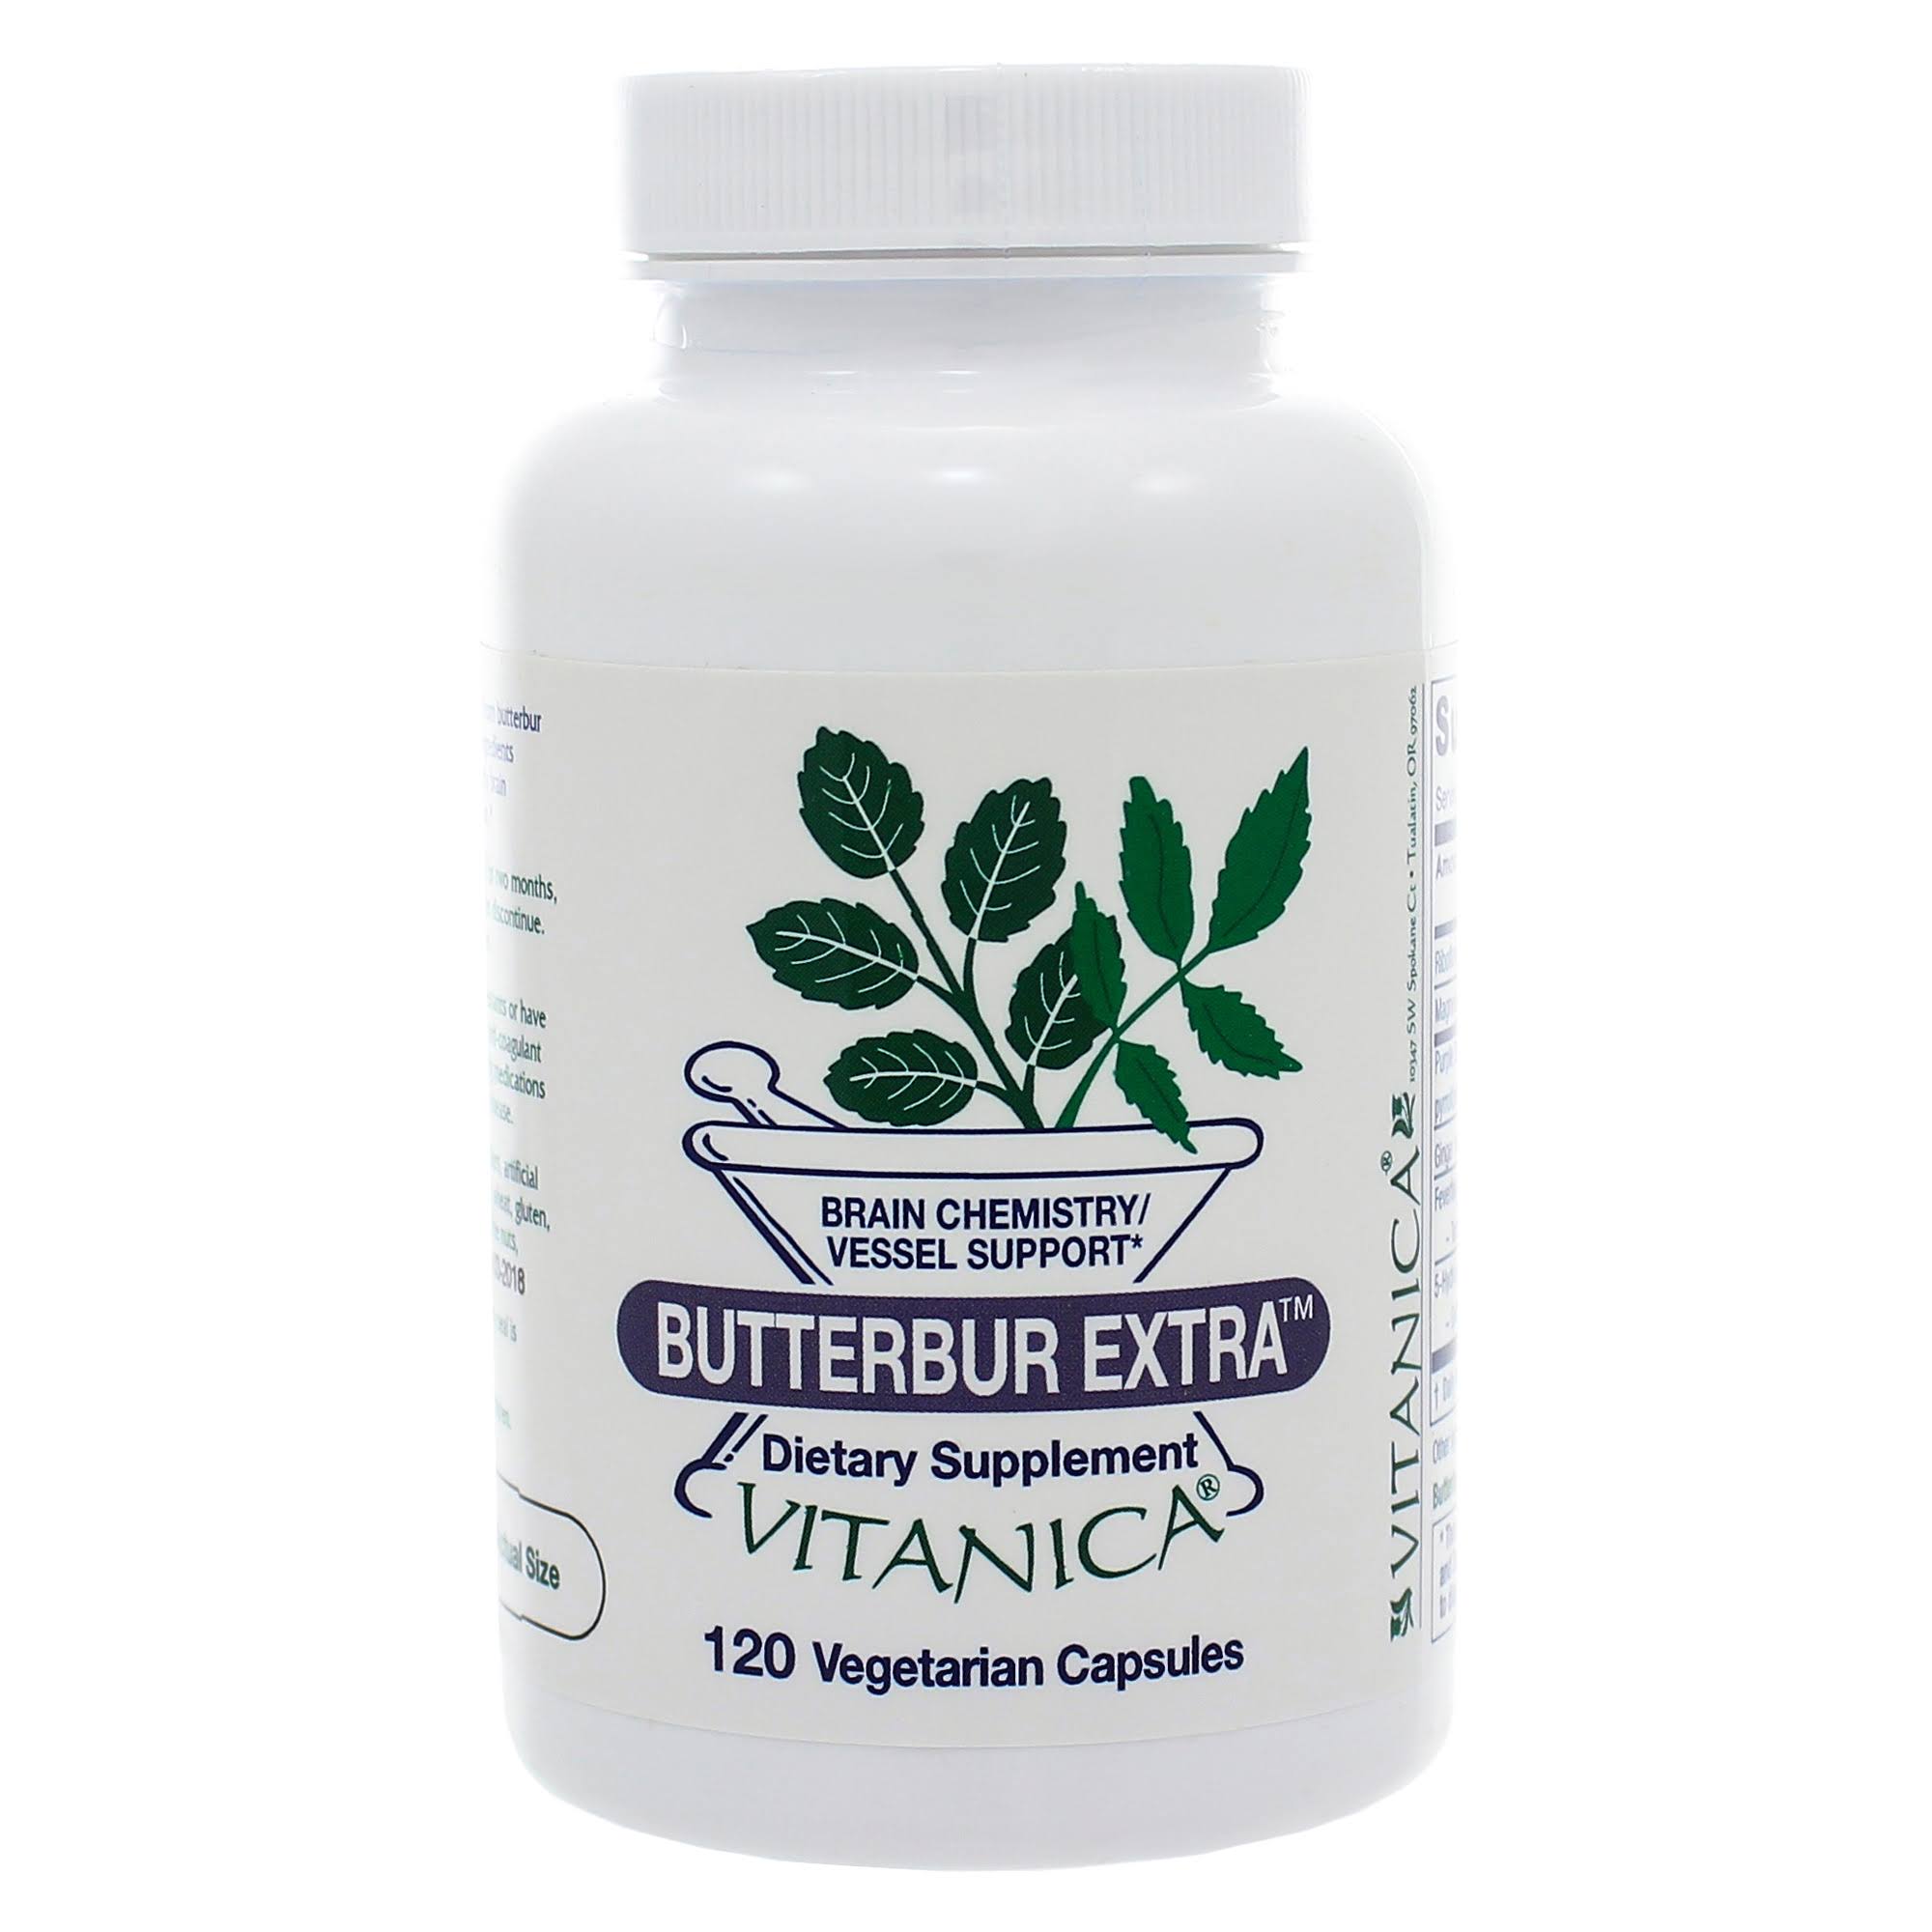 Vitanica Butterbur Extra Brain Chemistry and Vessel Support - 120ct